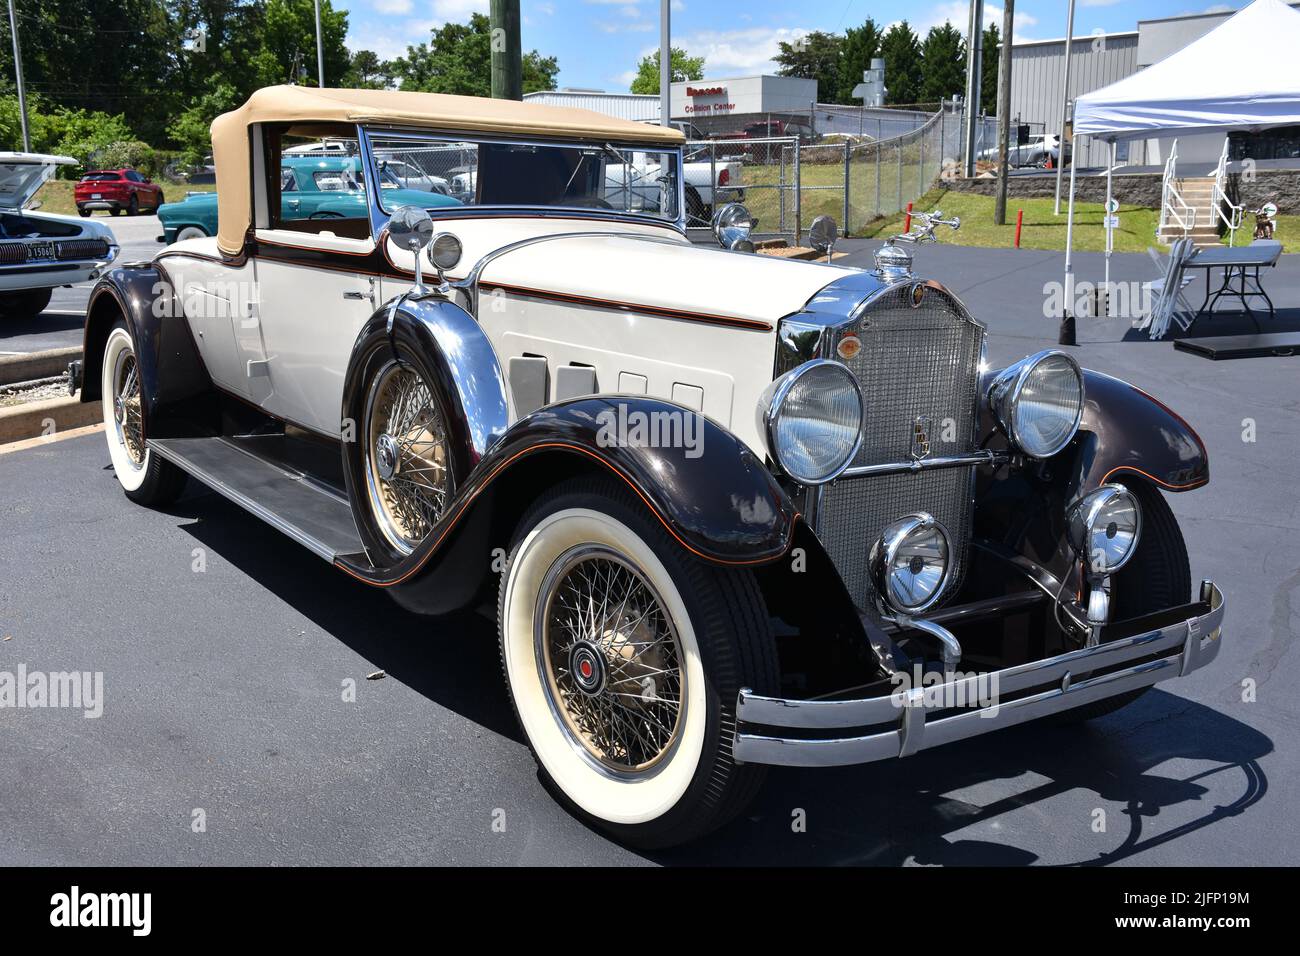 A 1928 Packard Convertible on display at a car show. Stock Photo